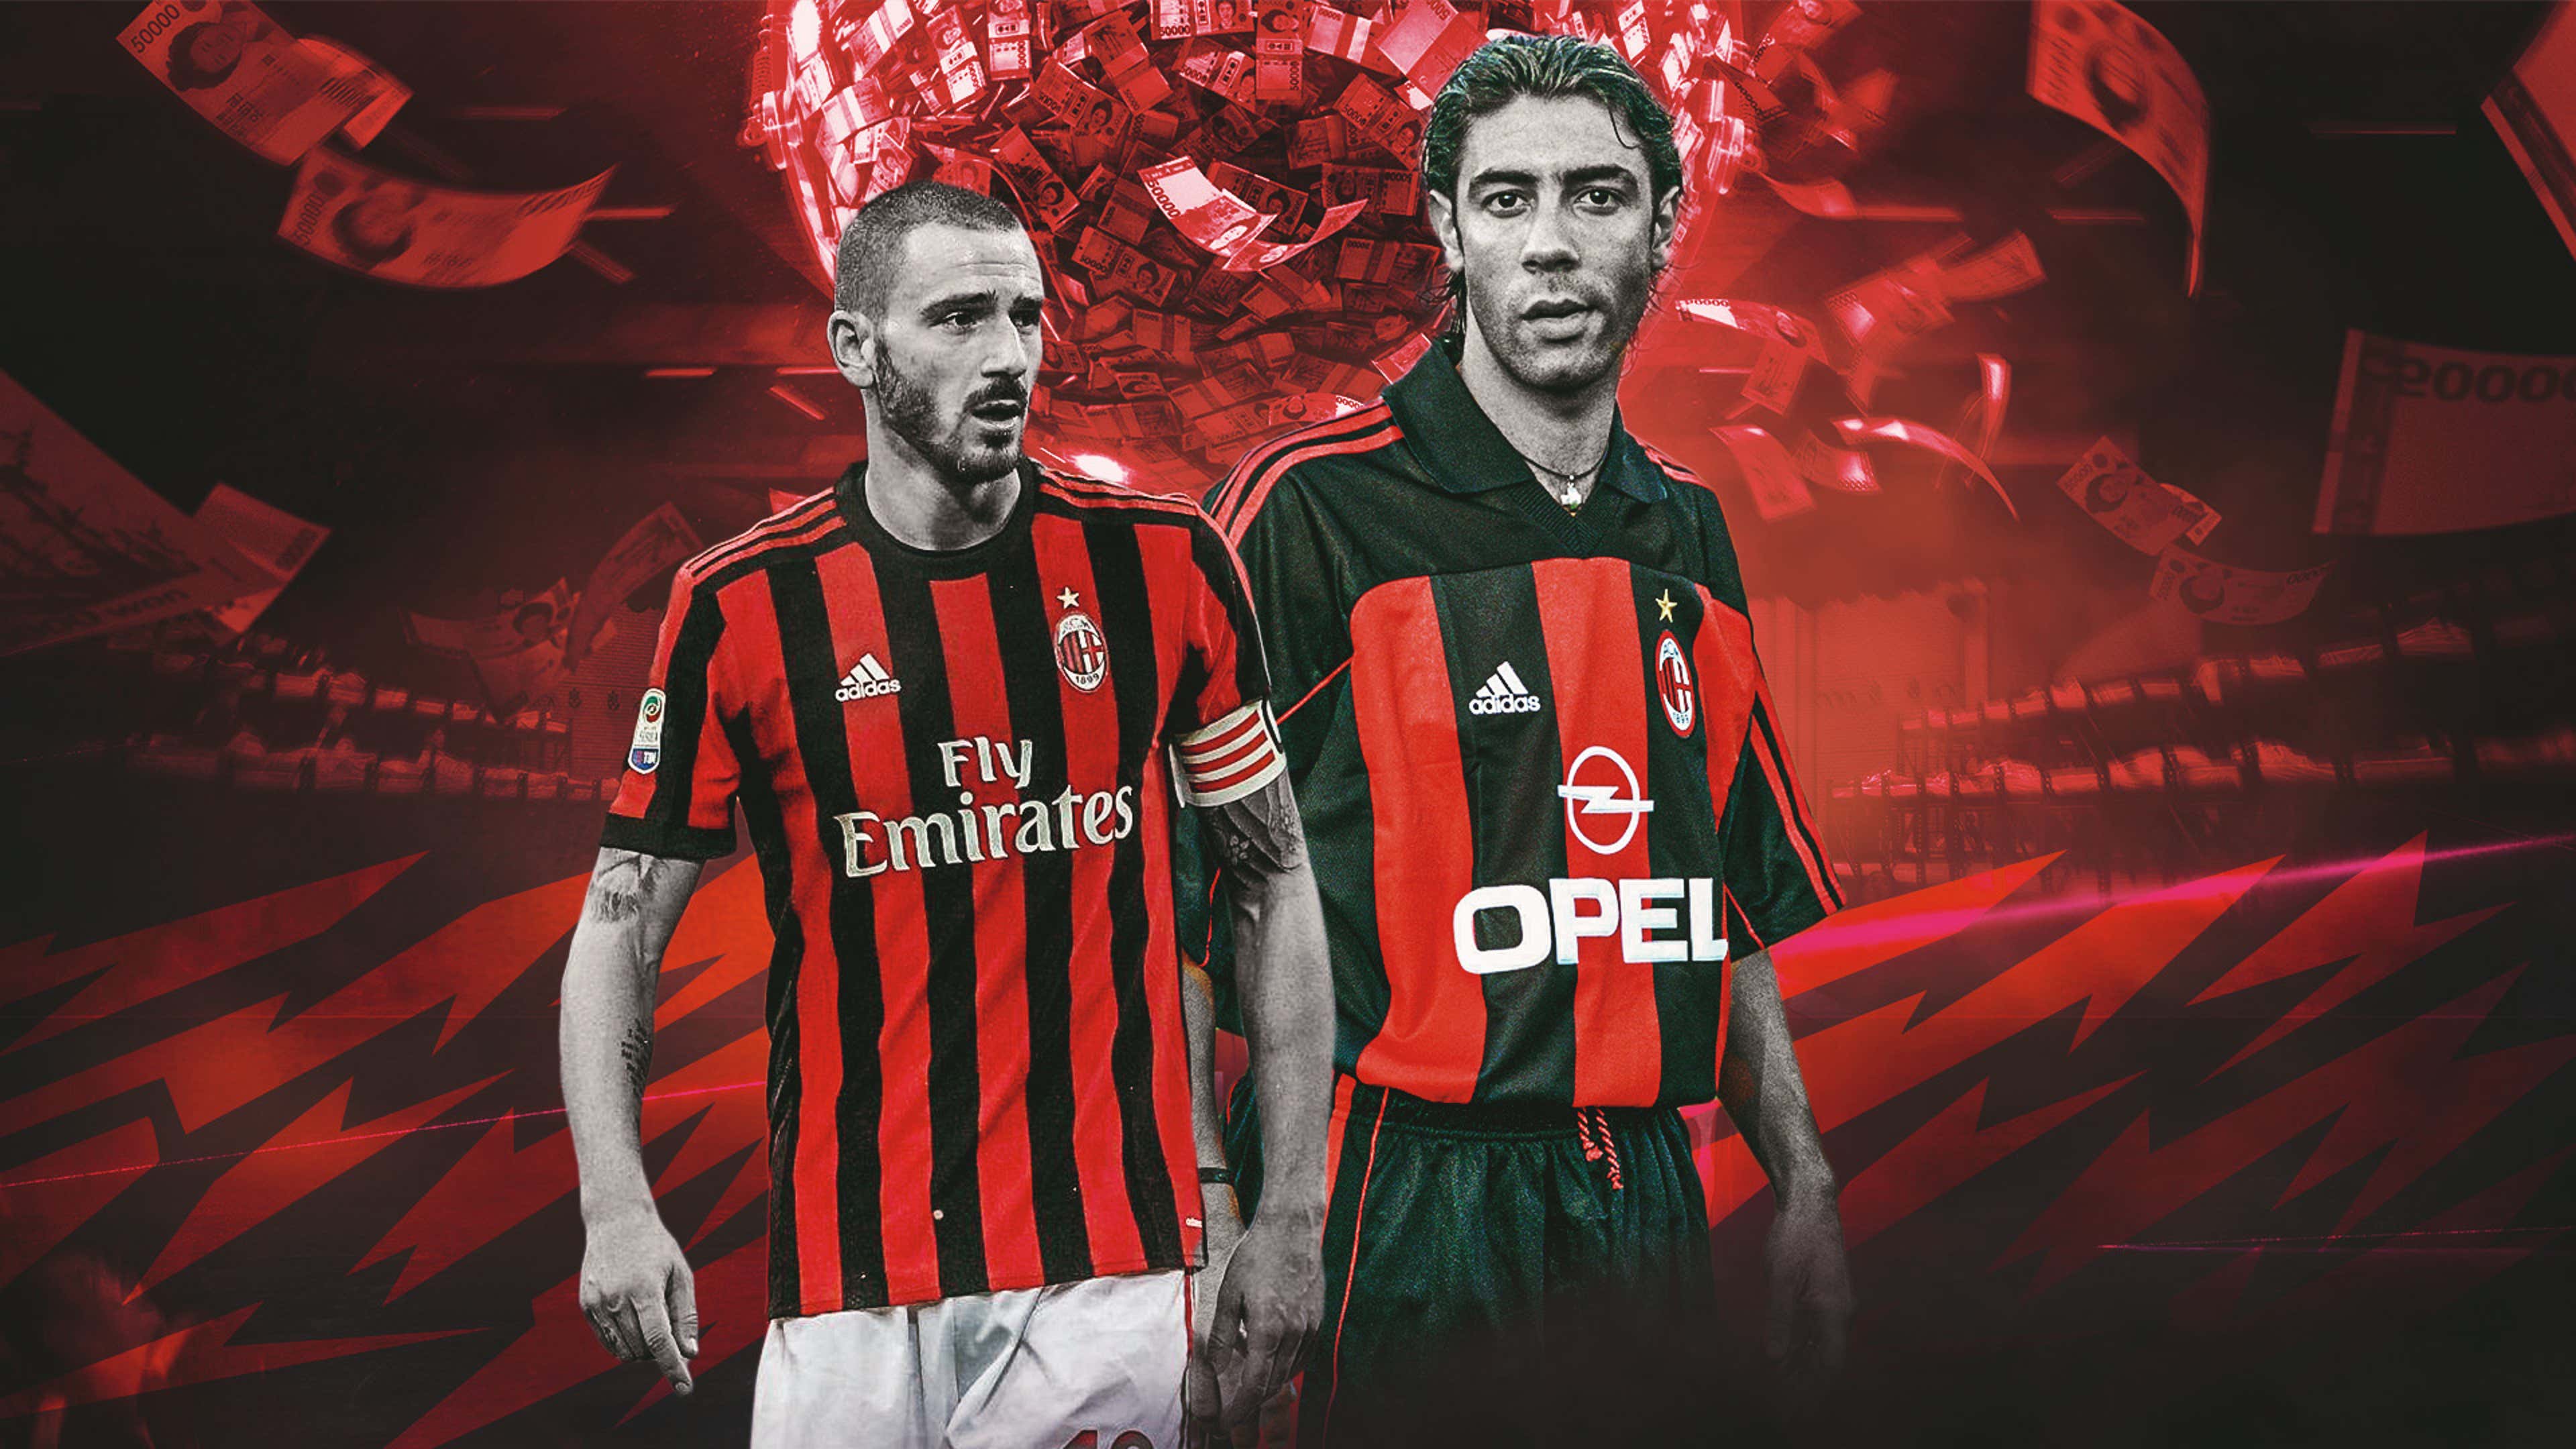 AC Milan home jersey 2016/17 - youth